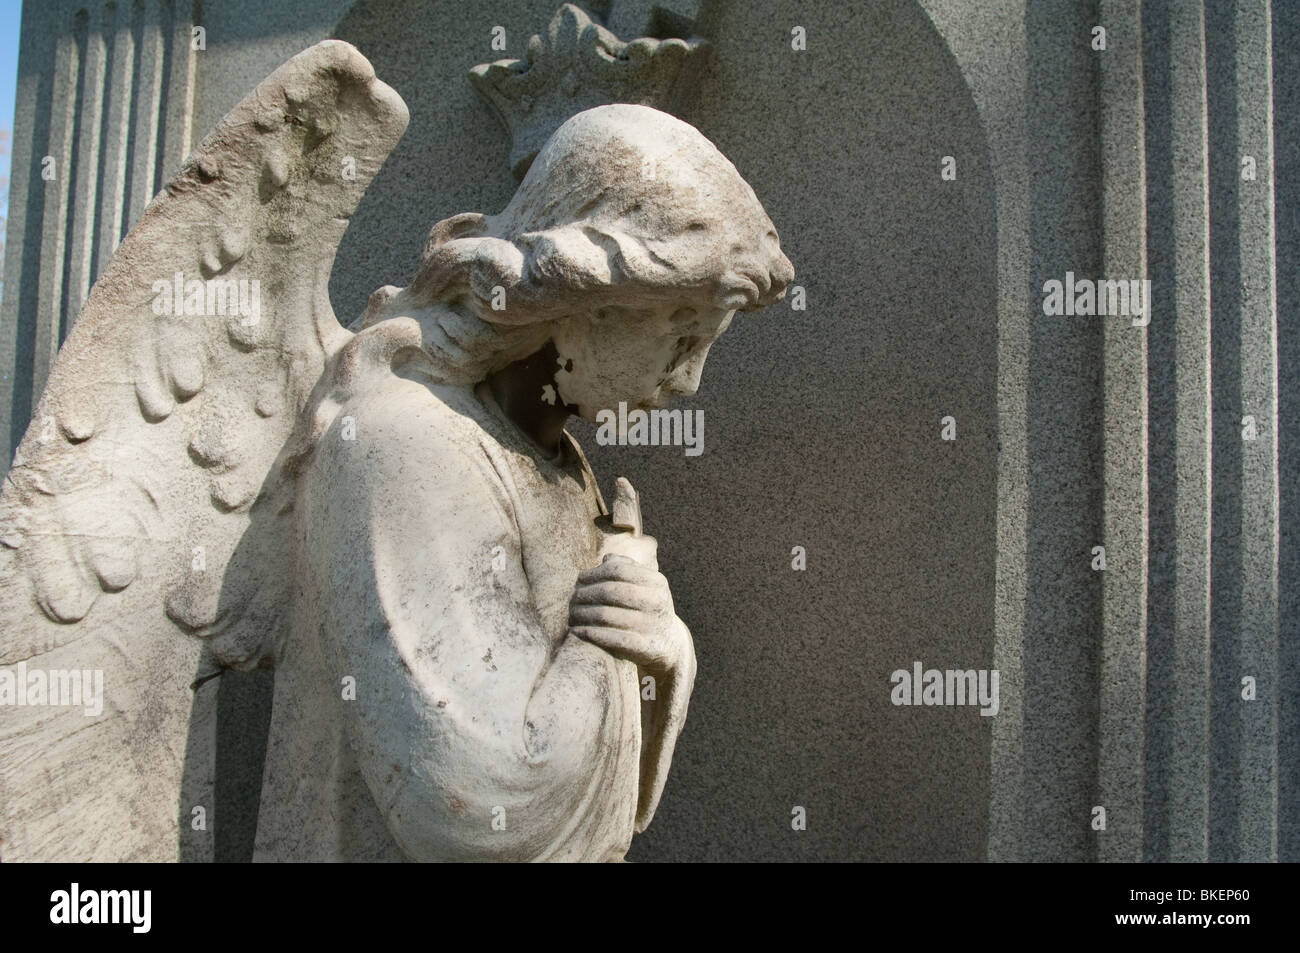 Statue of a genuflecting angel in a servile position, part of a cemetery grave marker. Stock Photo